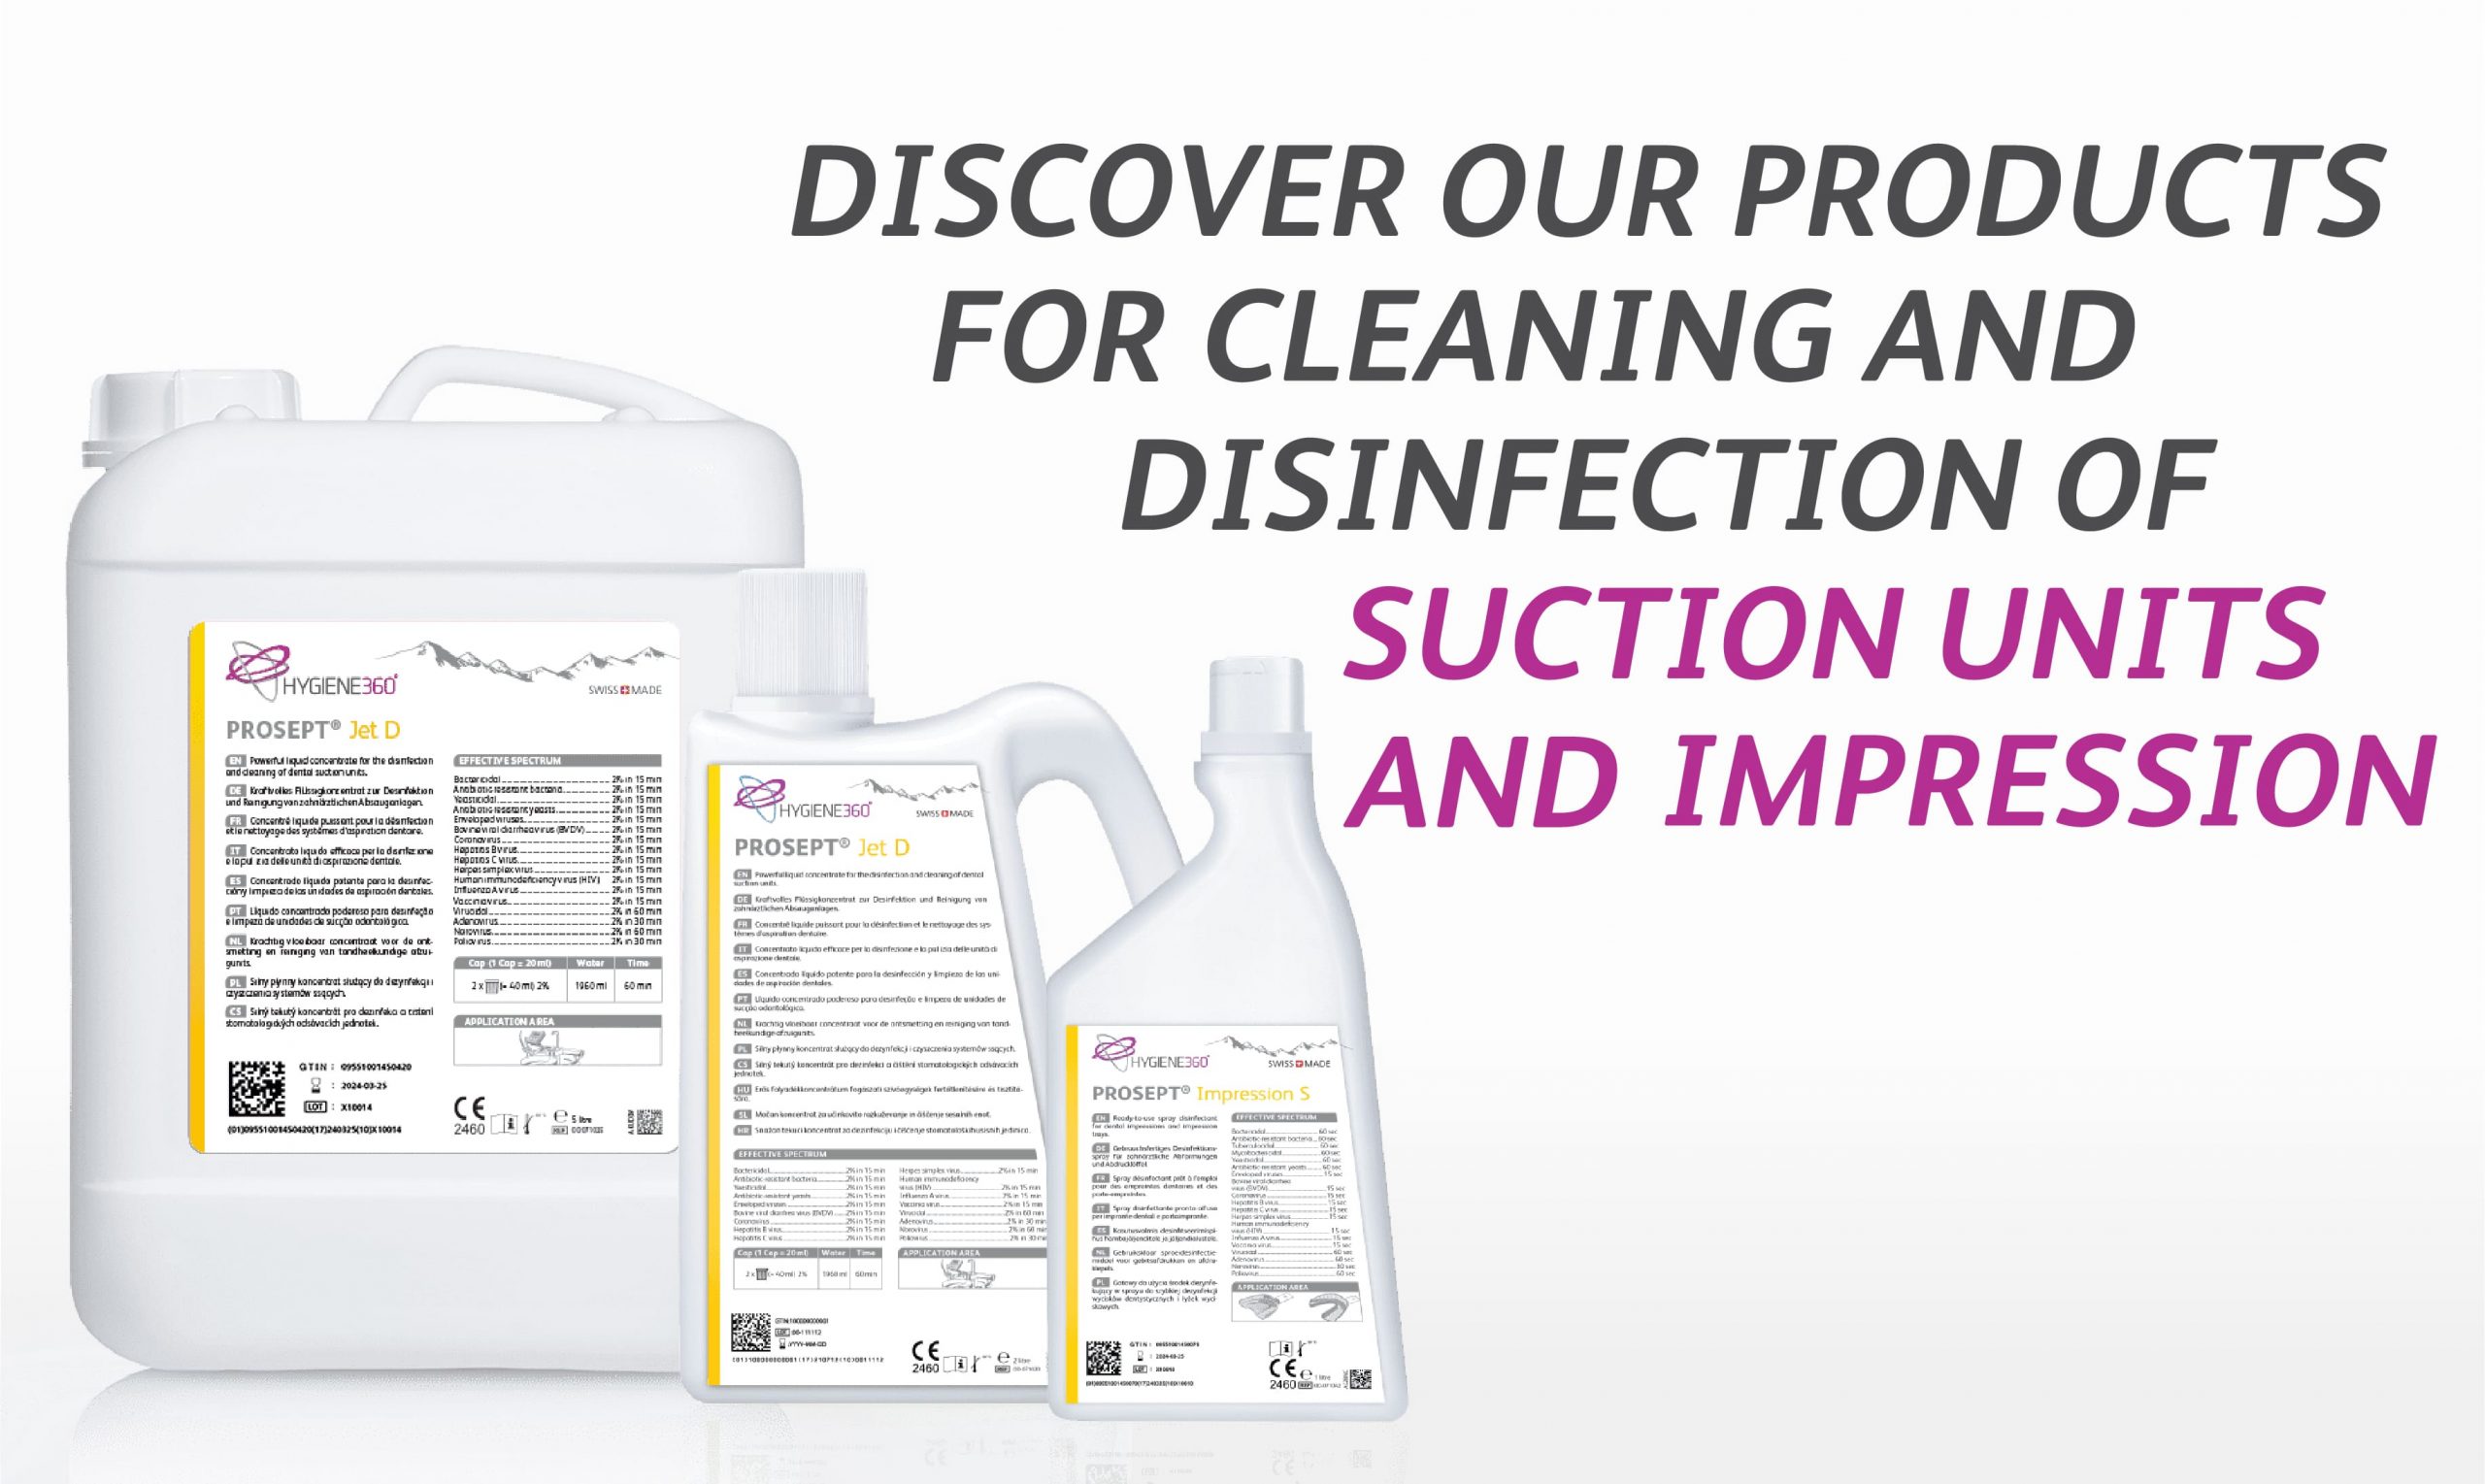 Suction Units, Impression Disinfectants and Cleaners